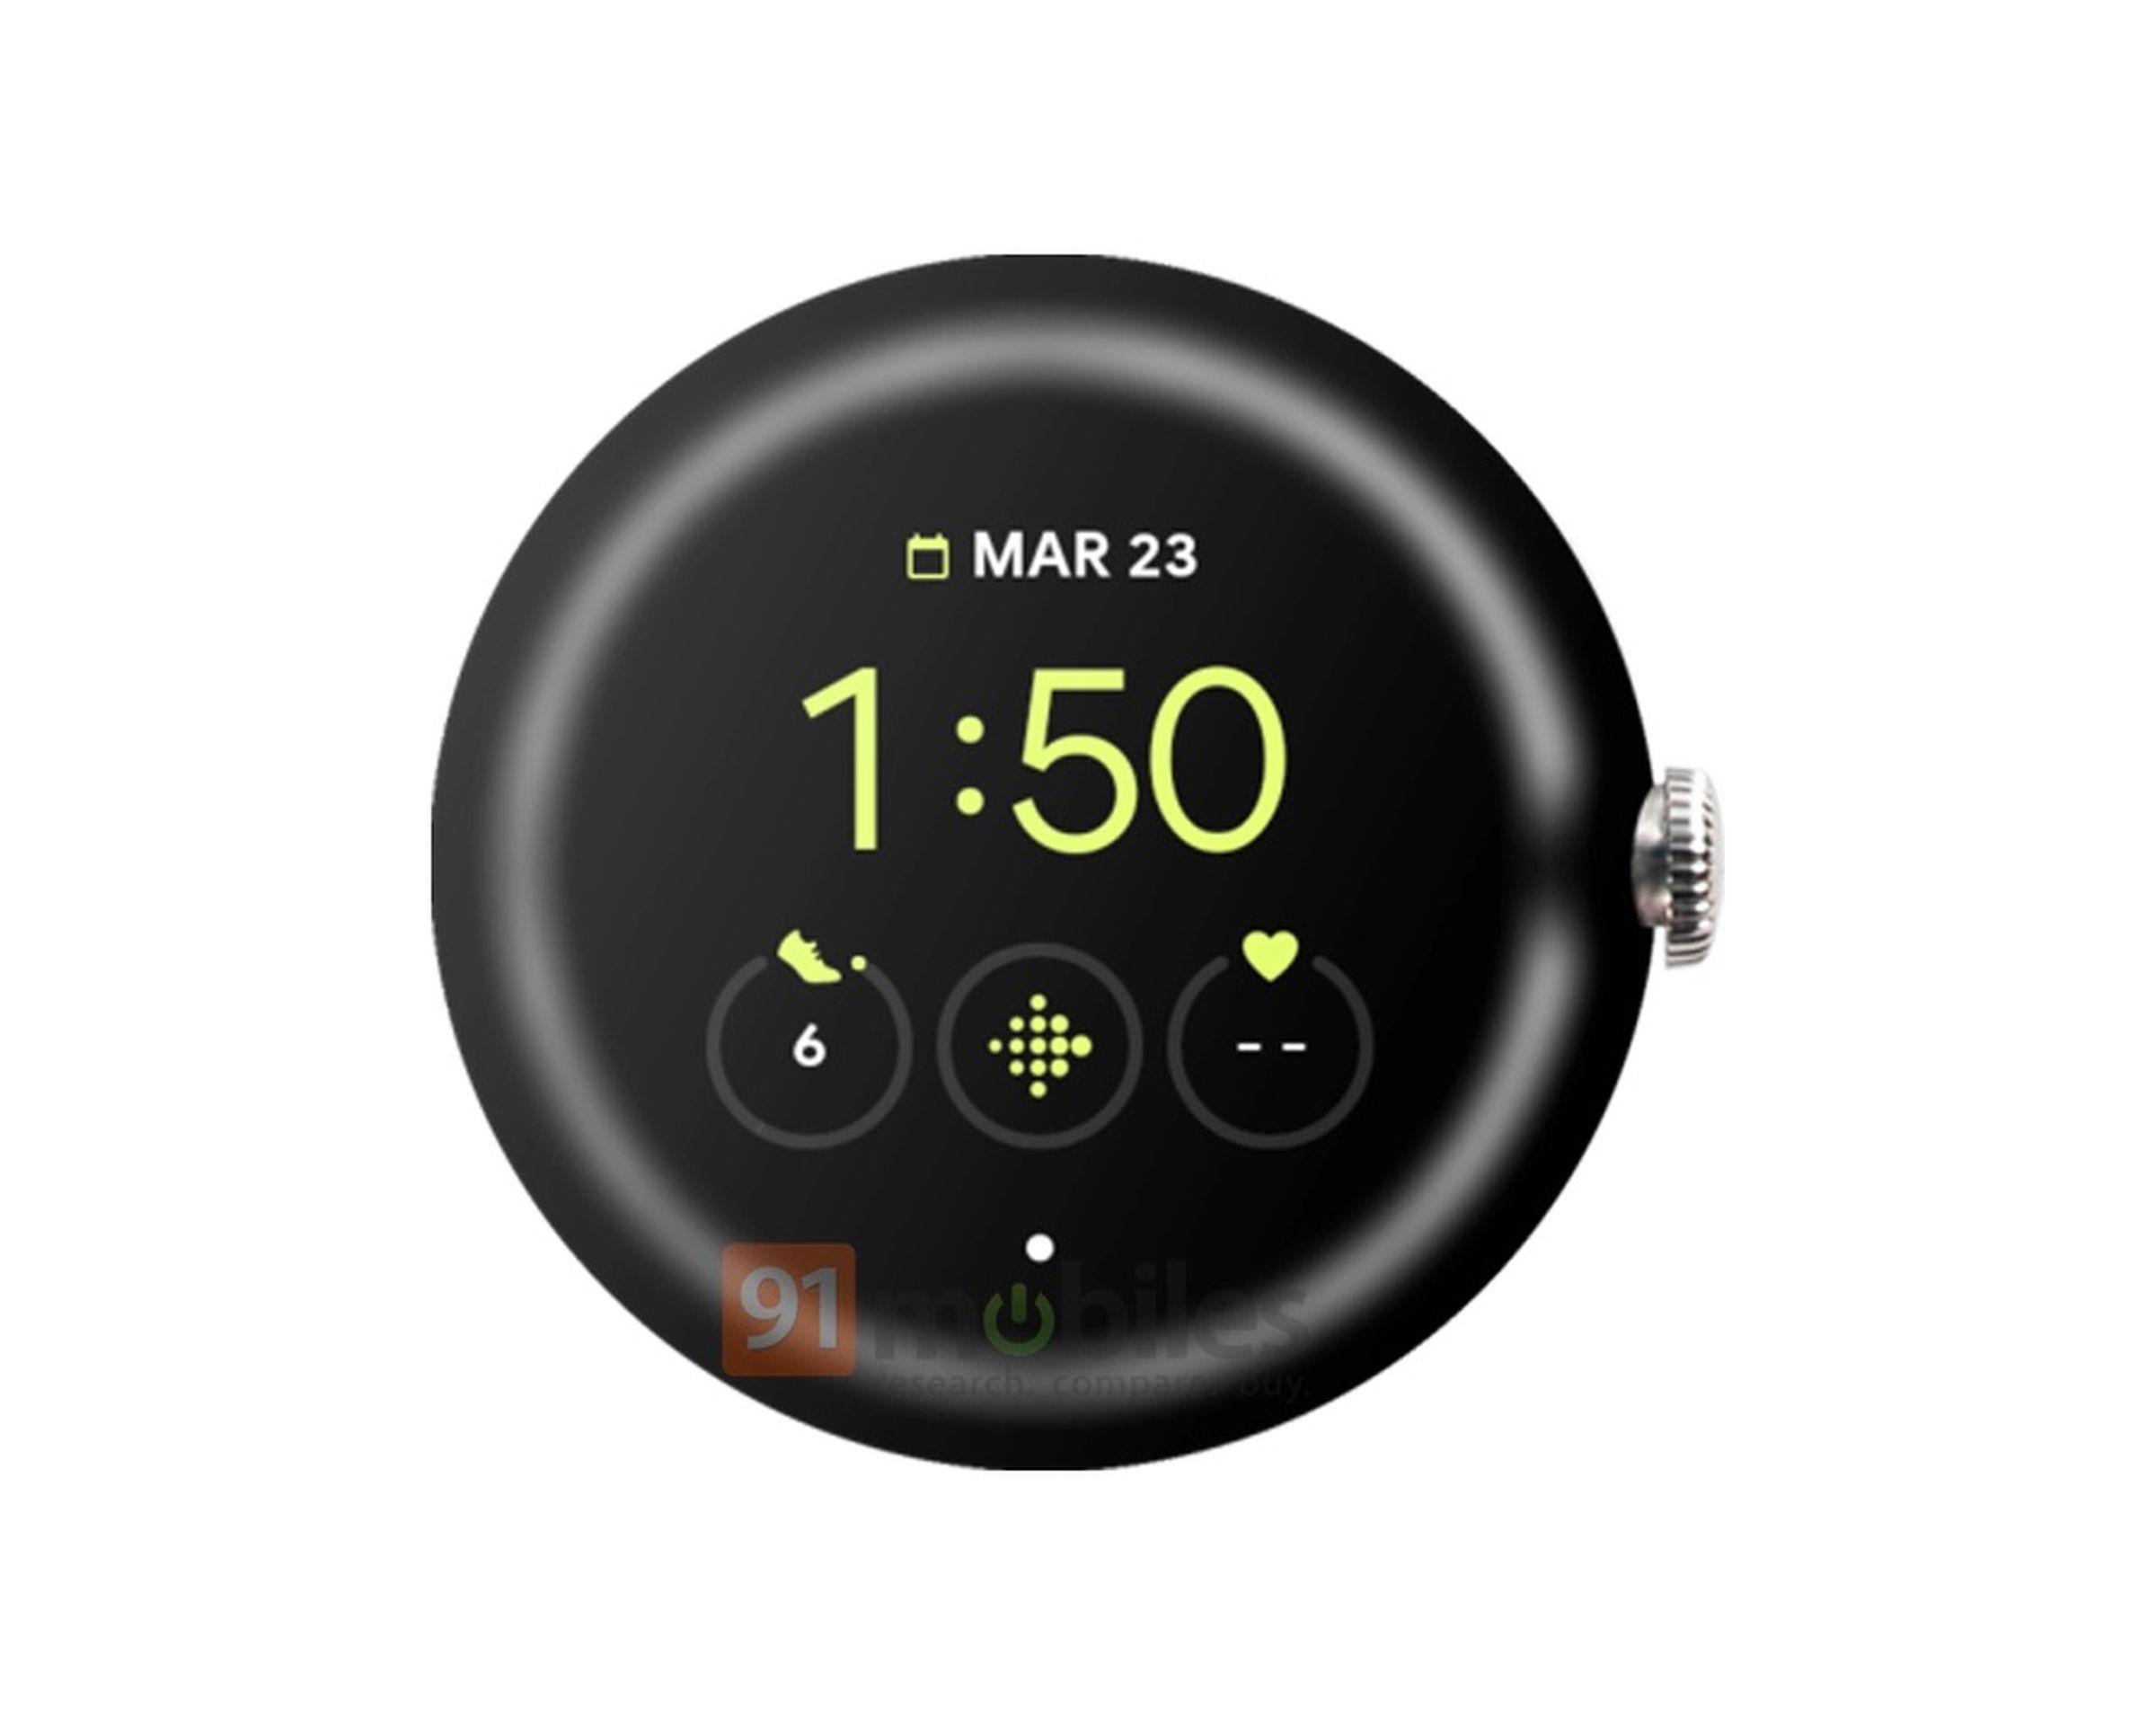 A render of what the Pixel Watch’s interface could look like.